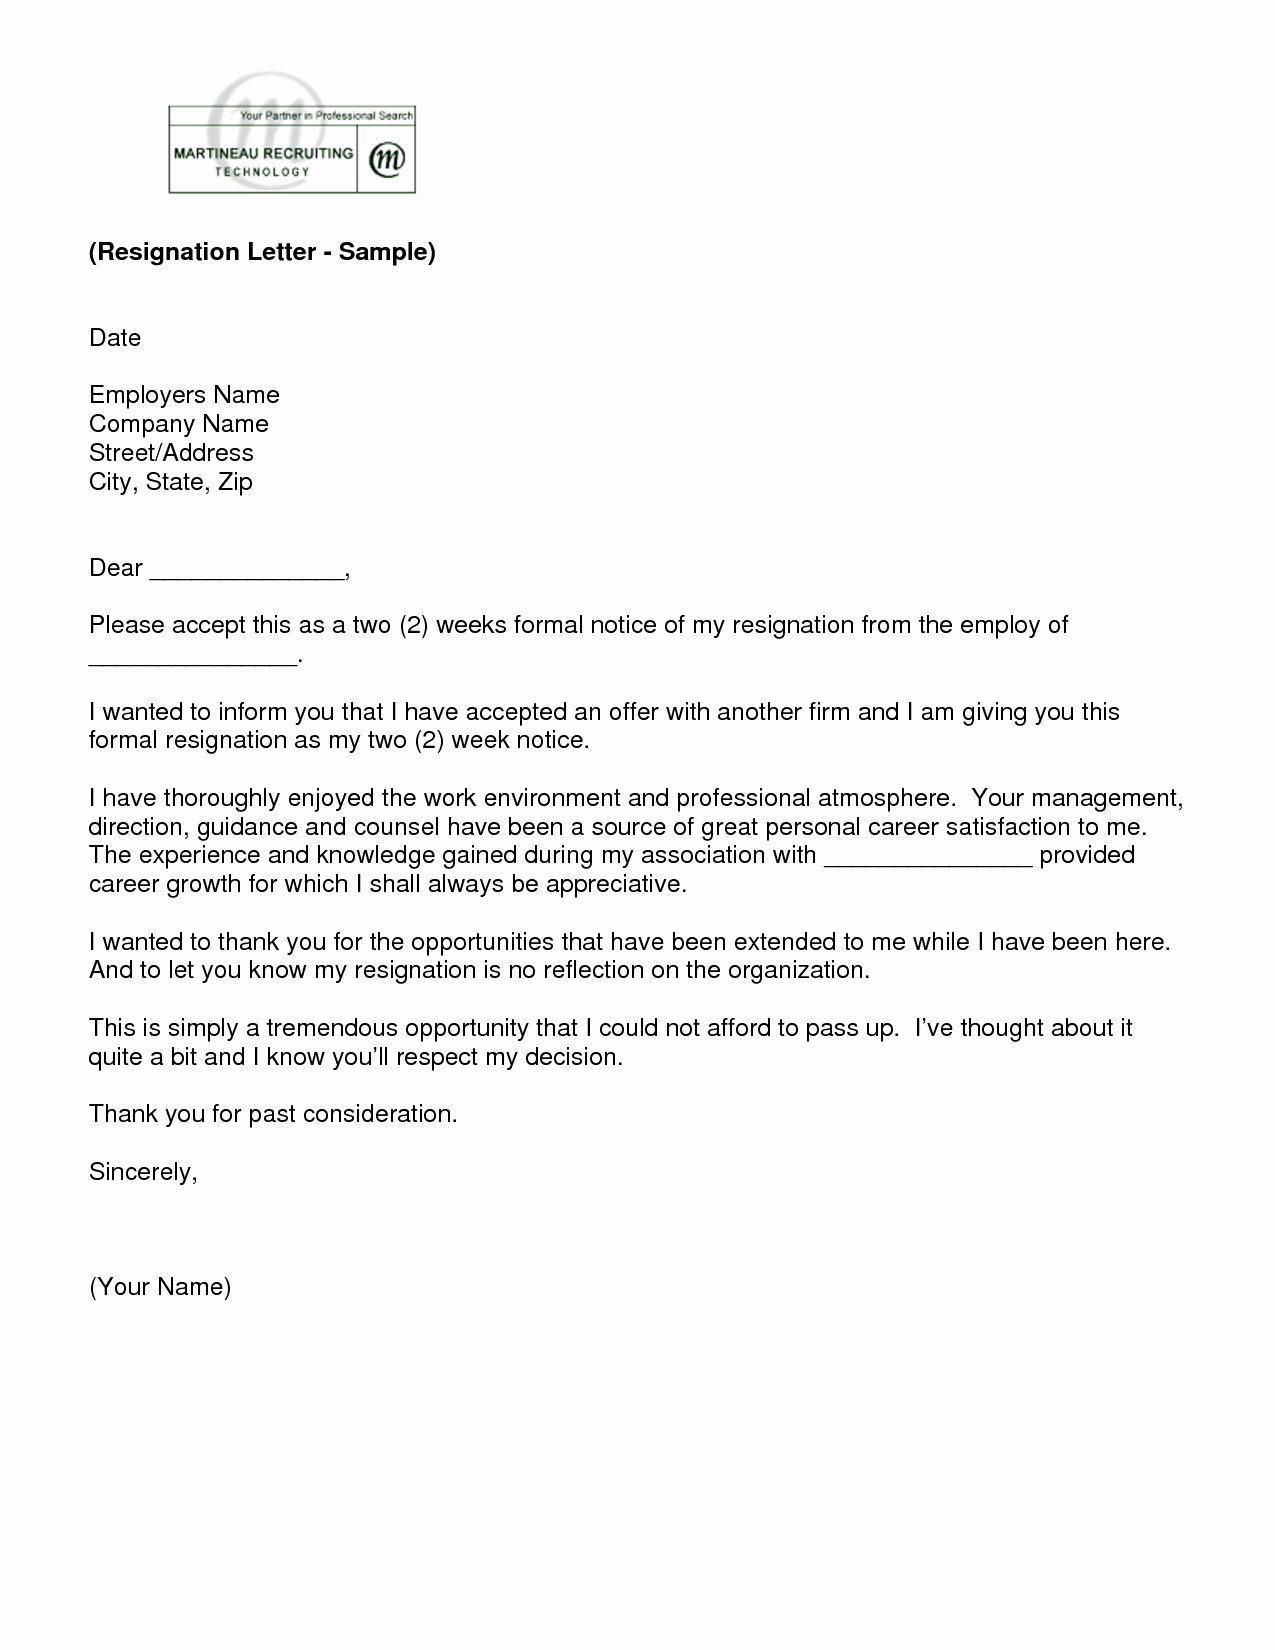 Resignation Letter Two Weeks Notice Best Of Letter Of Resignation 2 Weeks Notice Template